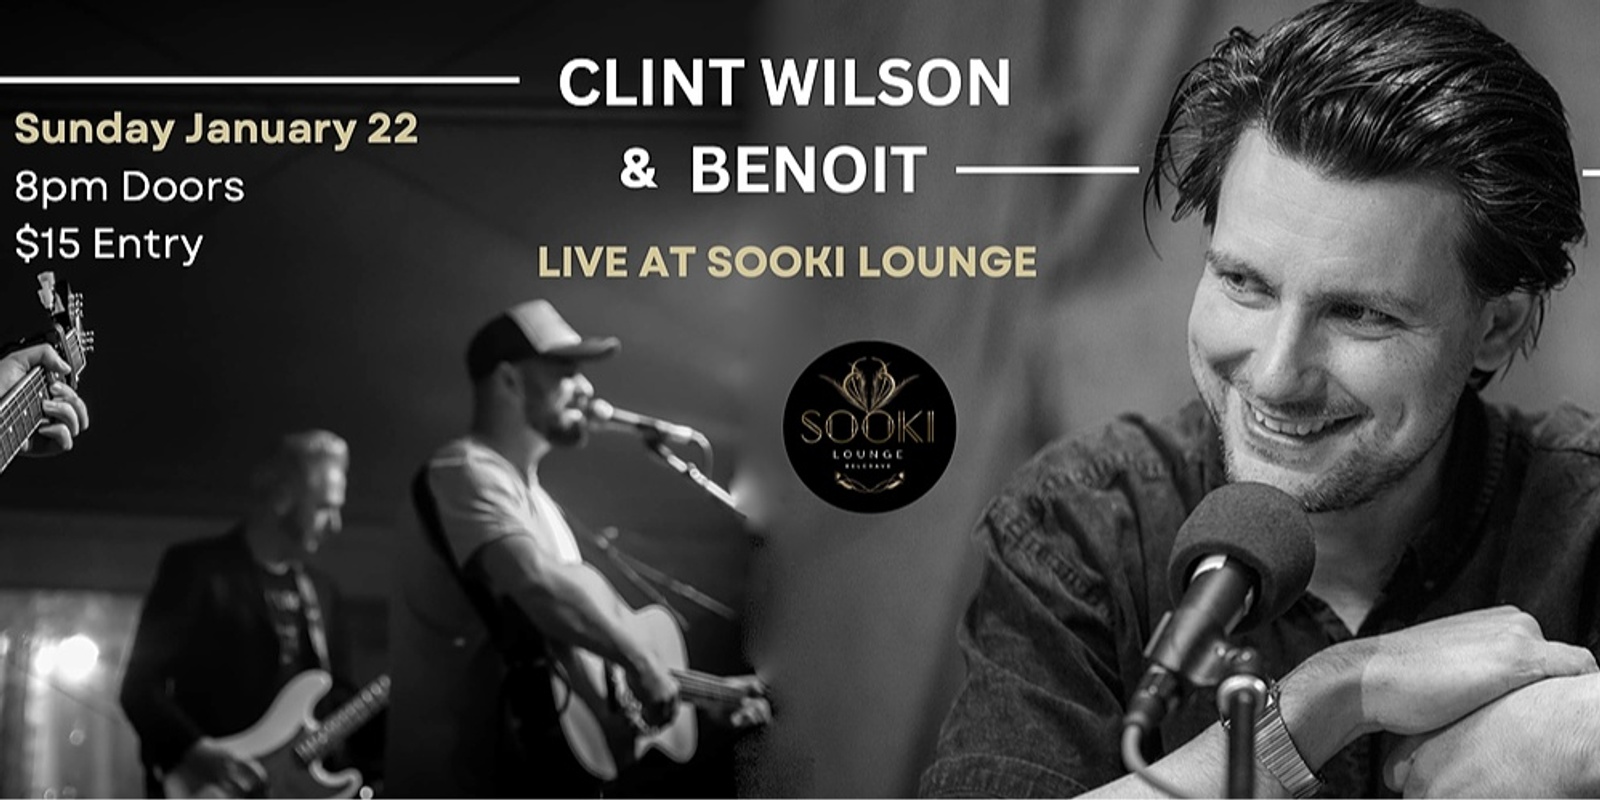 Banner image for Clint Wilson and Benoit Live at Sooki Lounge on Sunday Jan 22nd